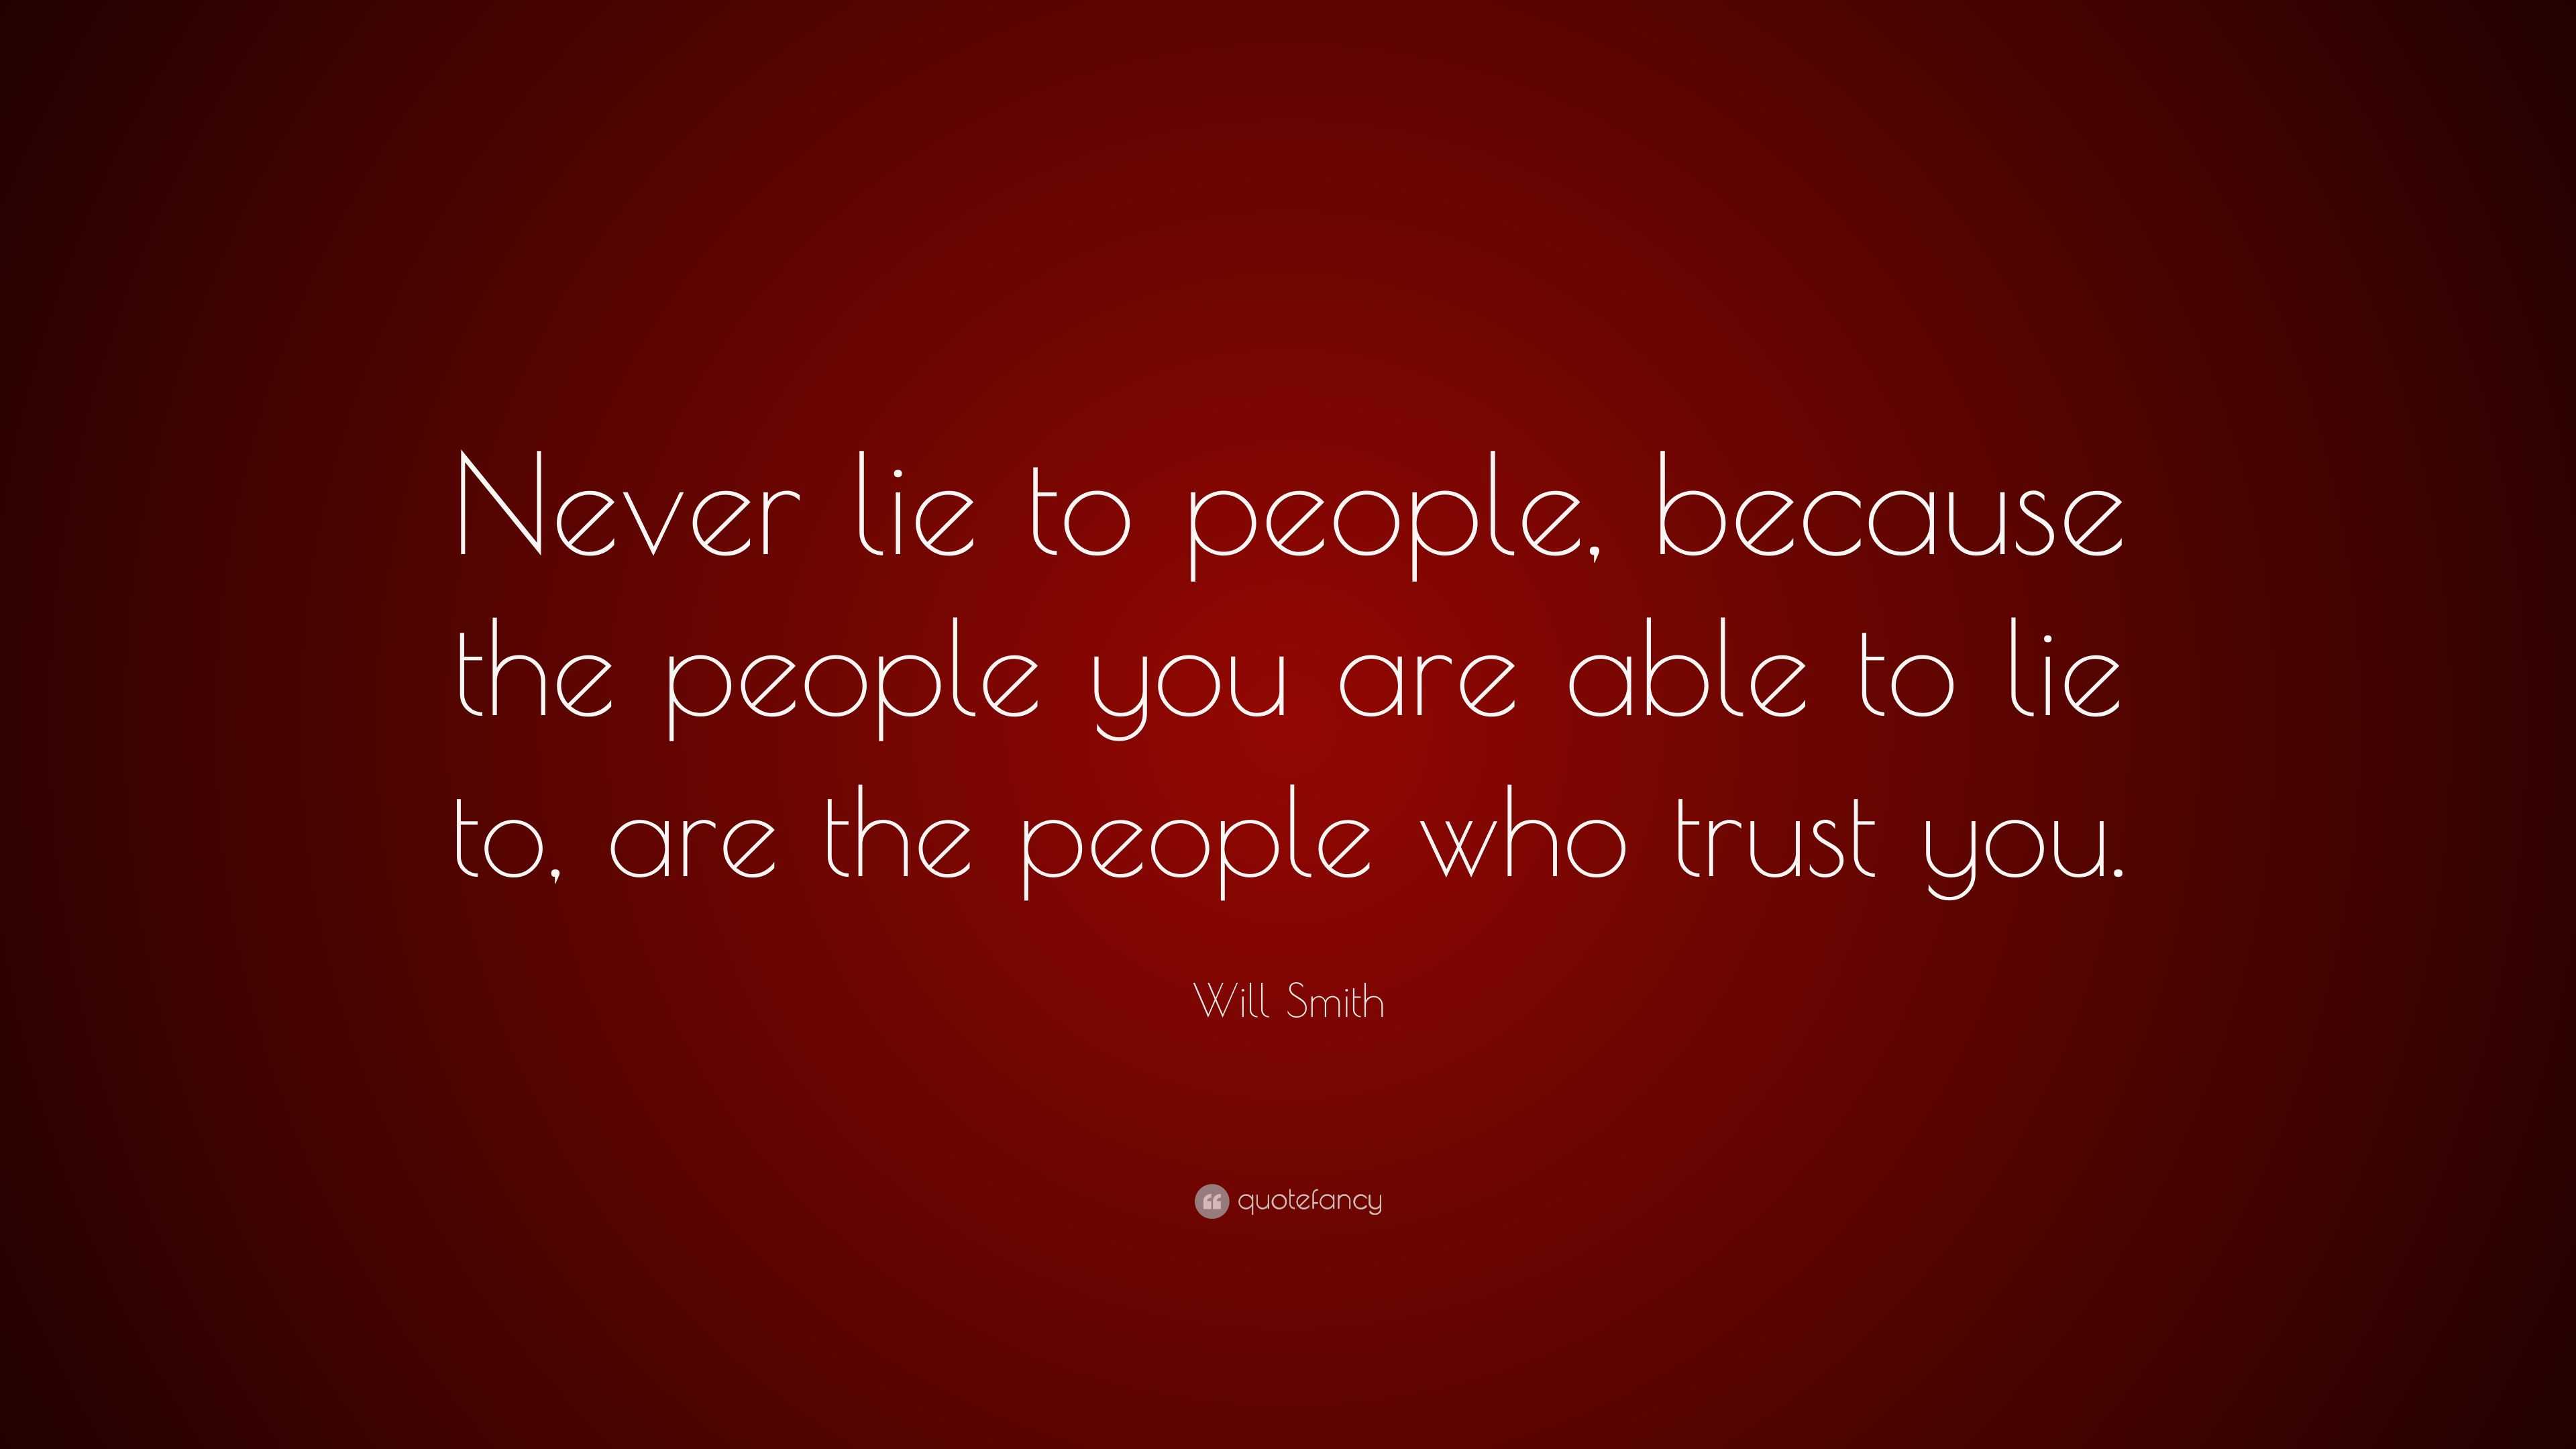 Will Smith Quote: “Never lie to people, because the people you are able ...